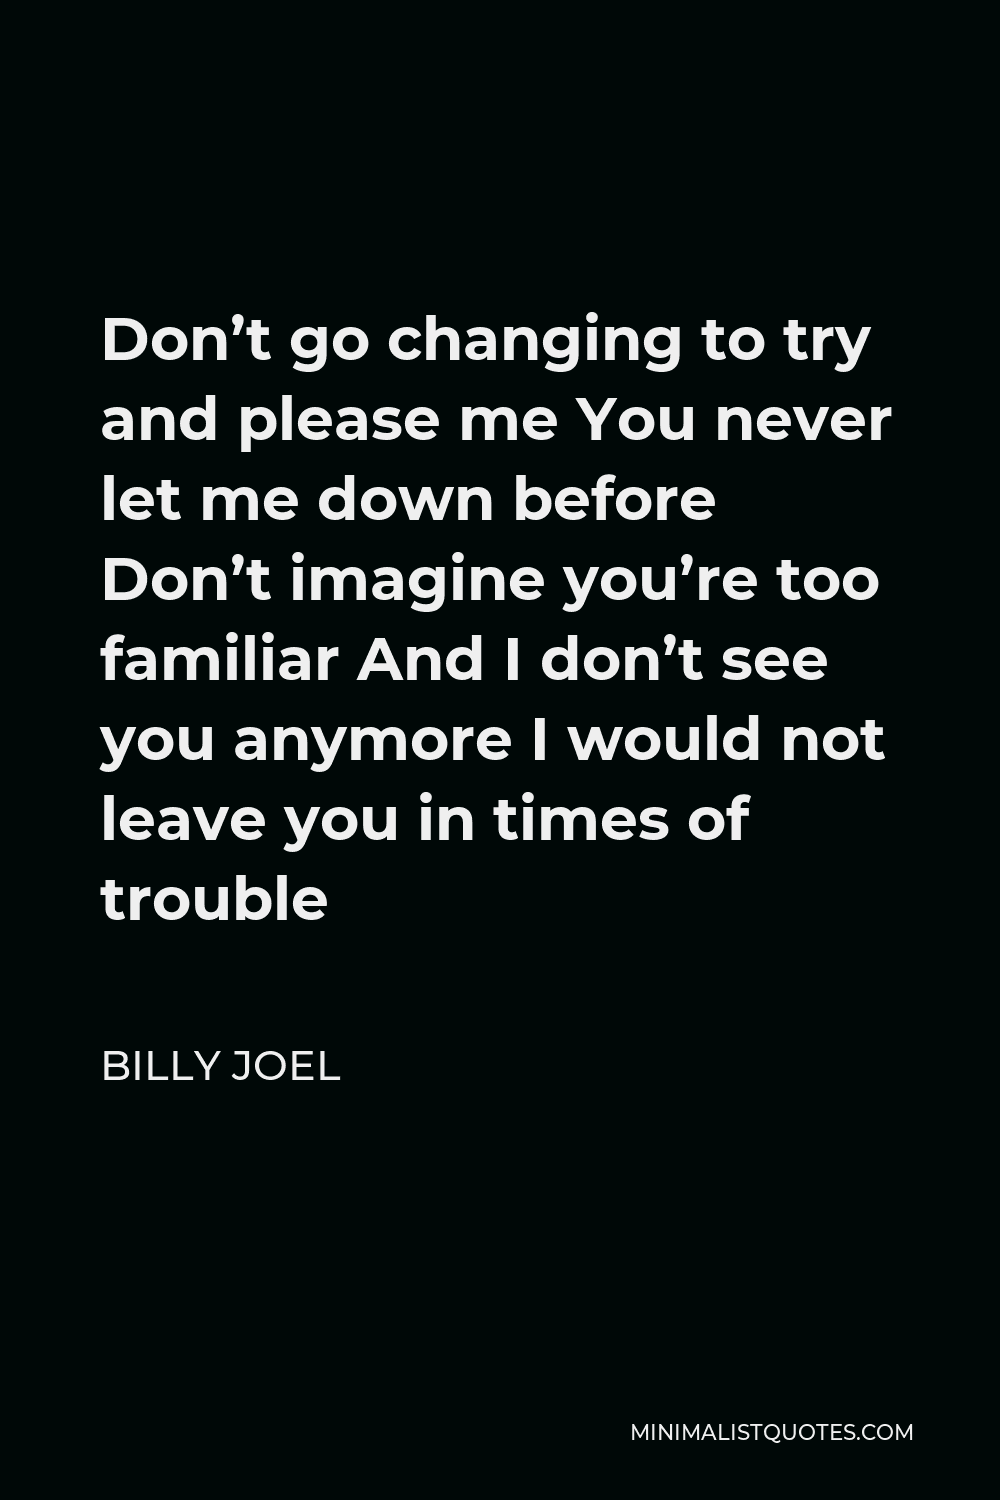 Billy Joel Quote - Don’t go changing, to try and please me You never let me down before.